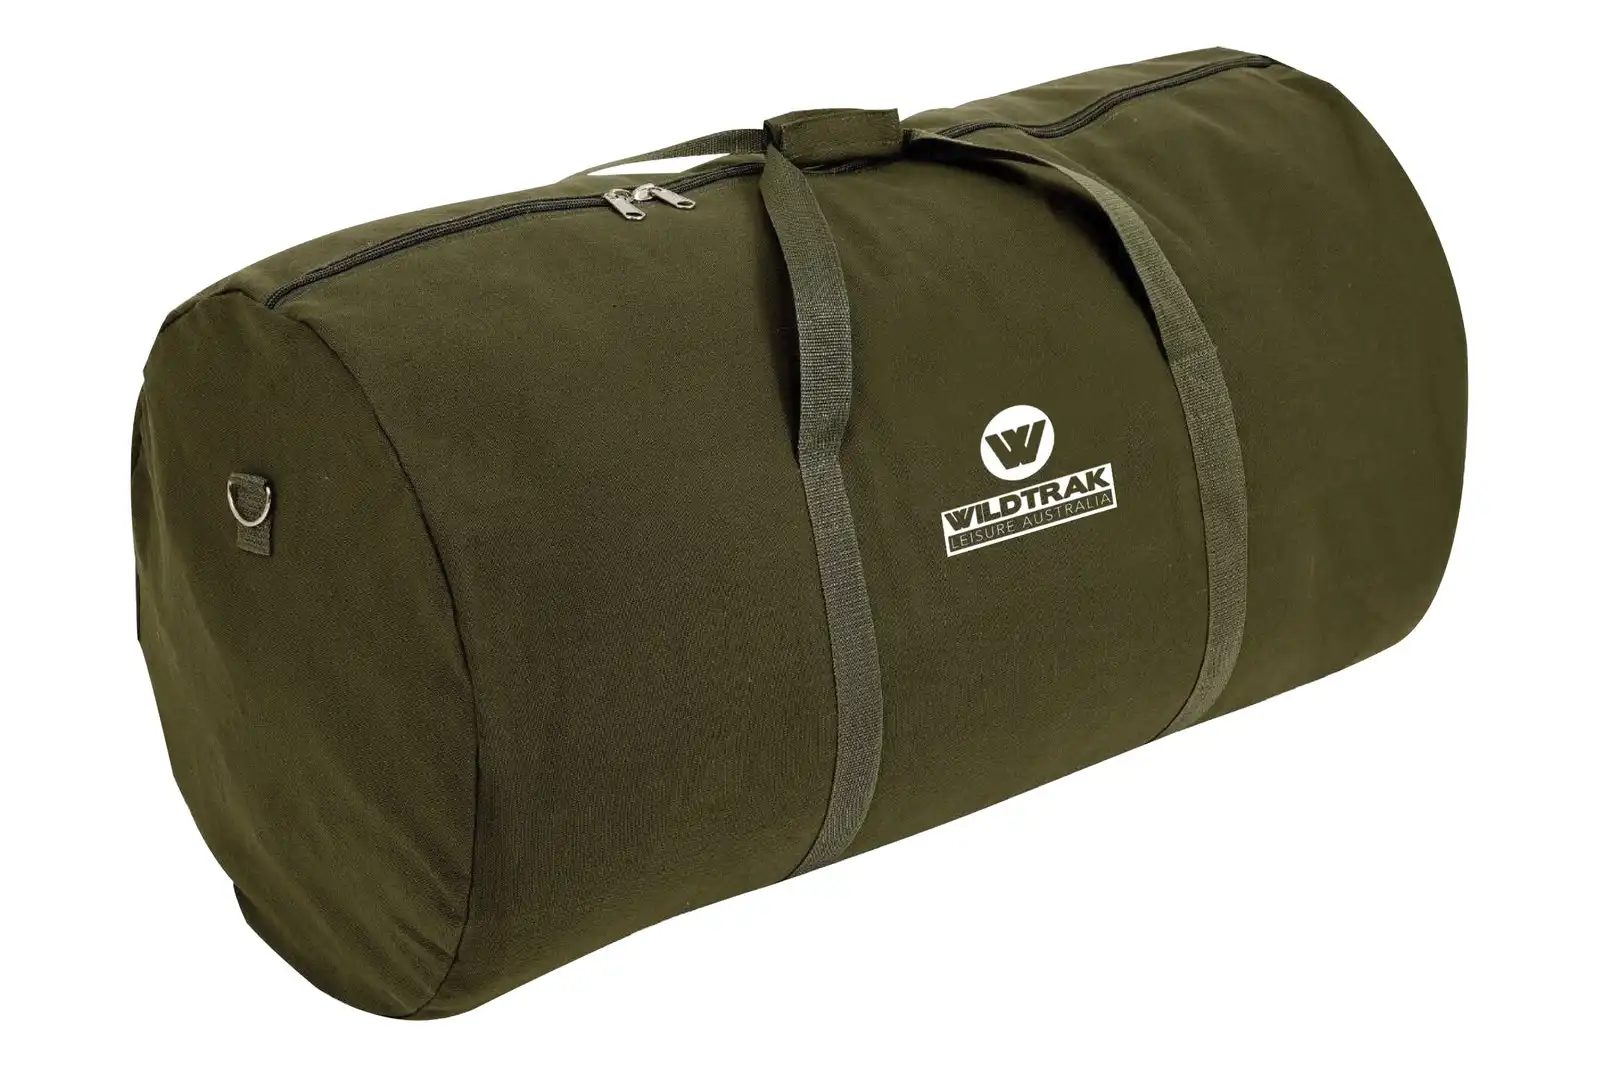 Wildtrak 150x50cm Cotton Canvas Double Swag Bag Camping Carry Storage Moss Green